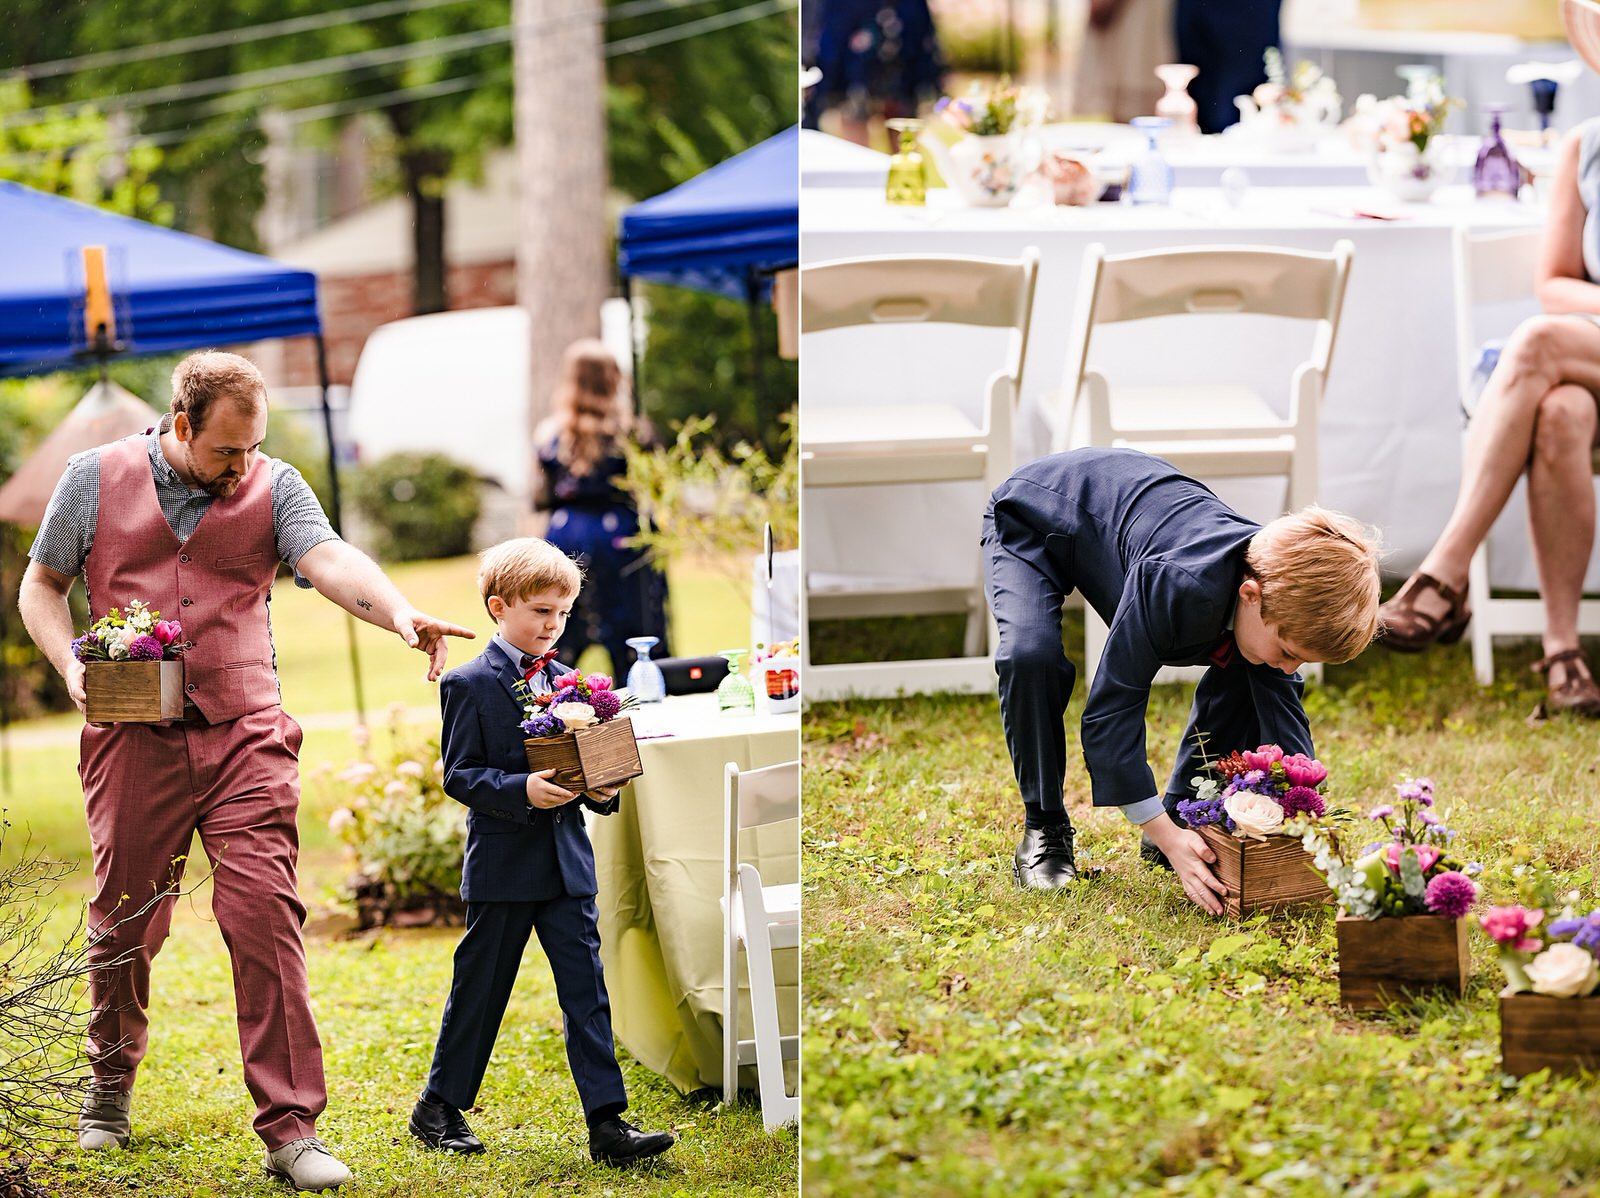 Relatives of the groom bring flowers in to line the aisle for a casual backyard wedding ceremony